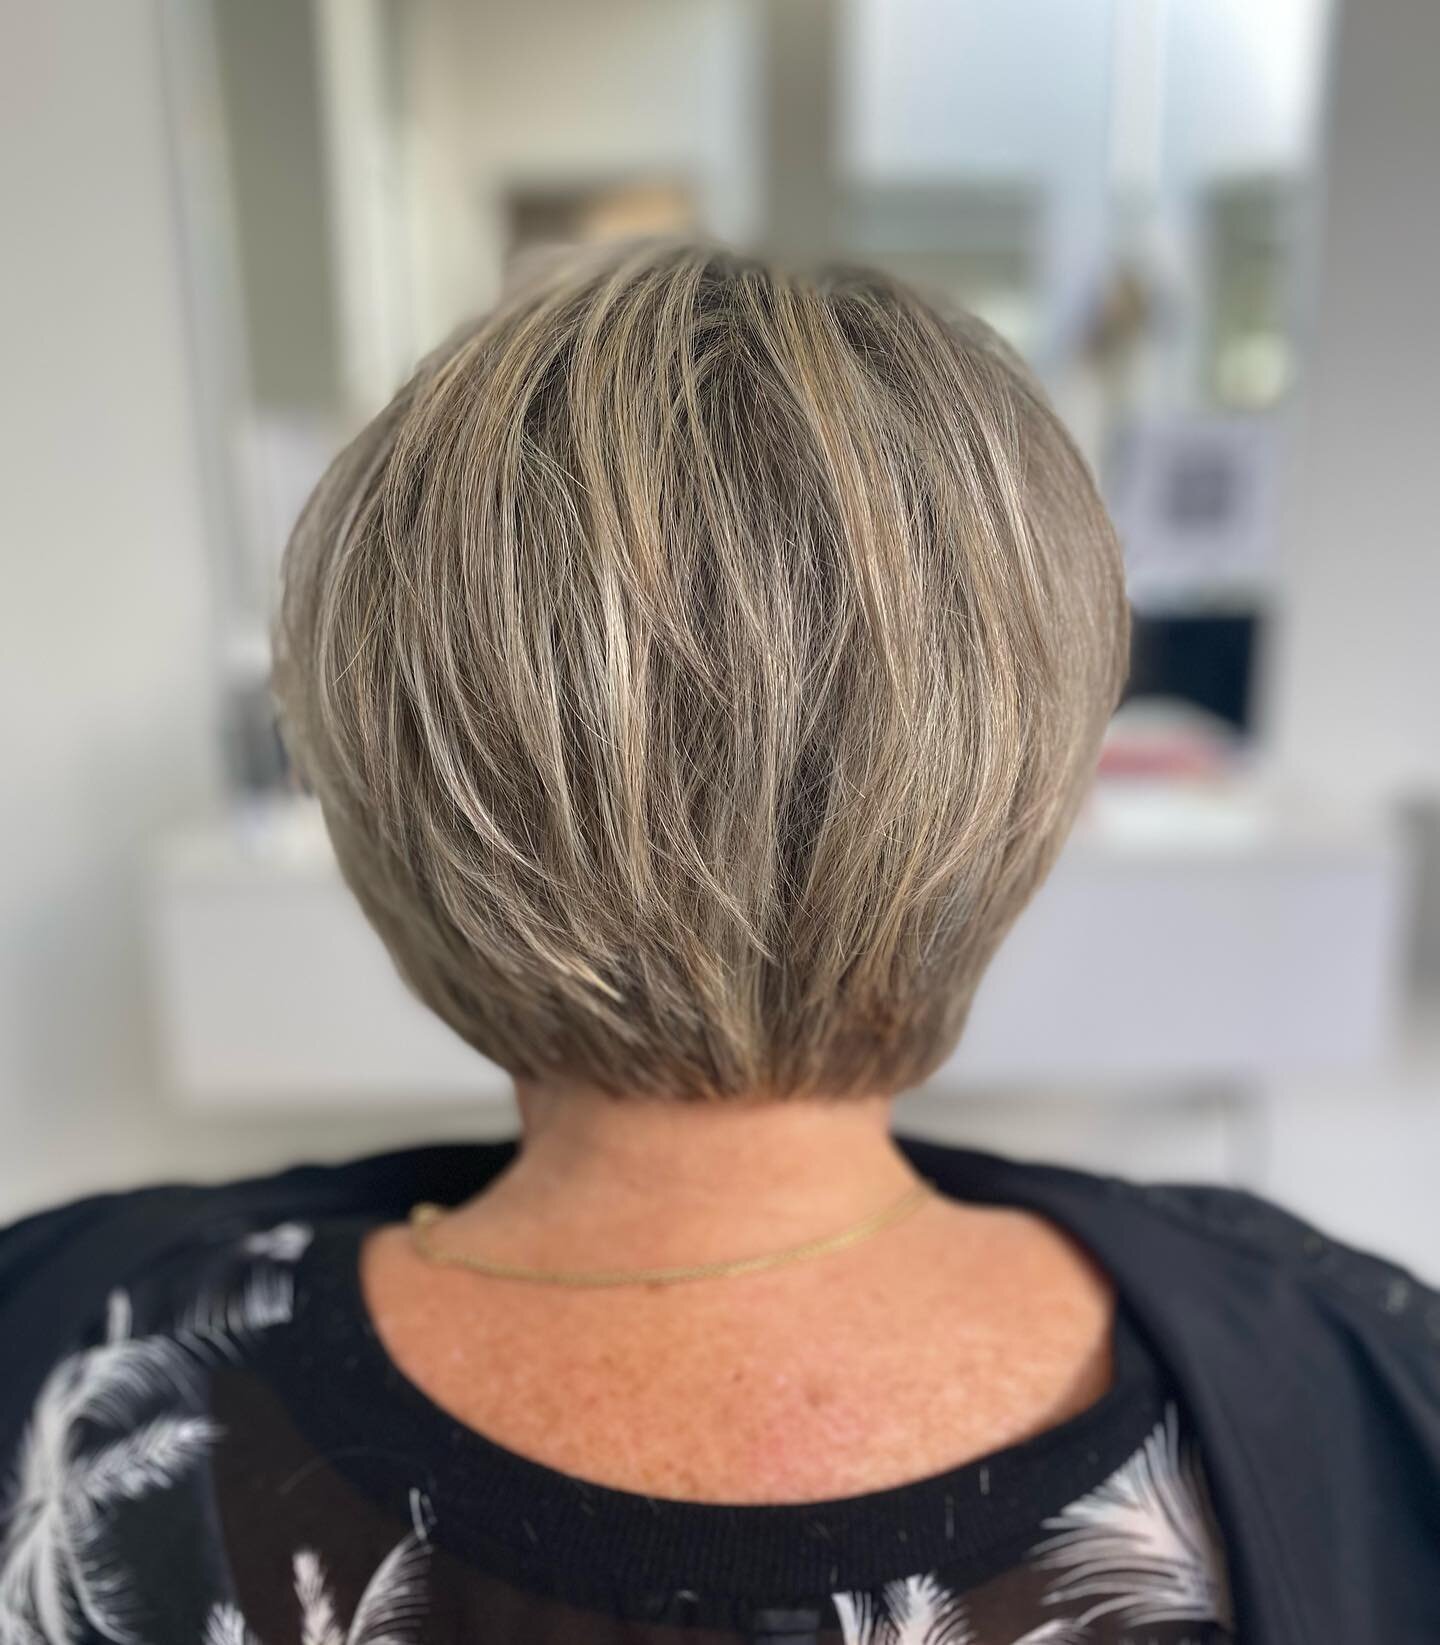 We do everything ... short and long !! We just love making people look and feel beautiful 💕💕
.
#blondehair #kerastasenz #lorealpronz #crewstylists  #queenstownhairdresser #shorthair